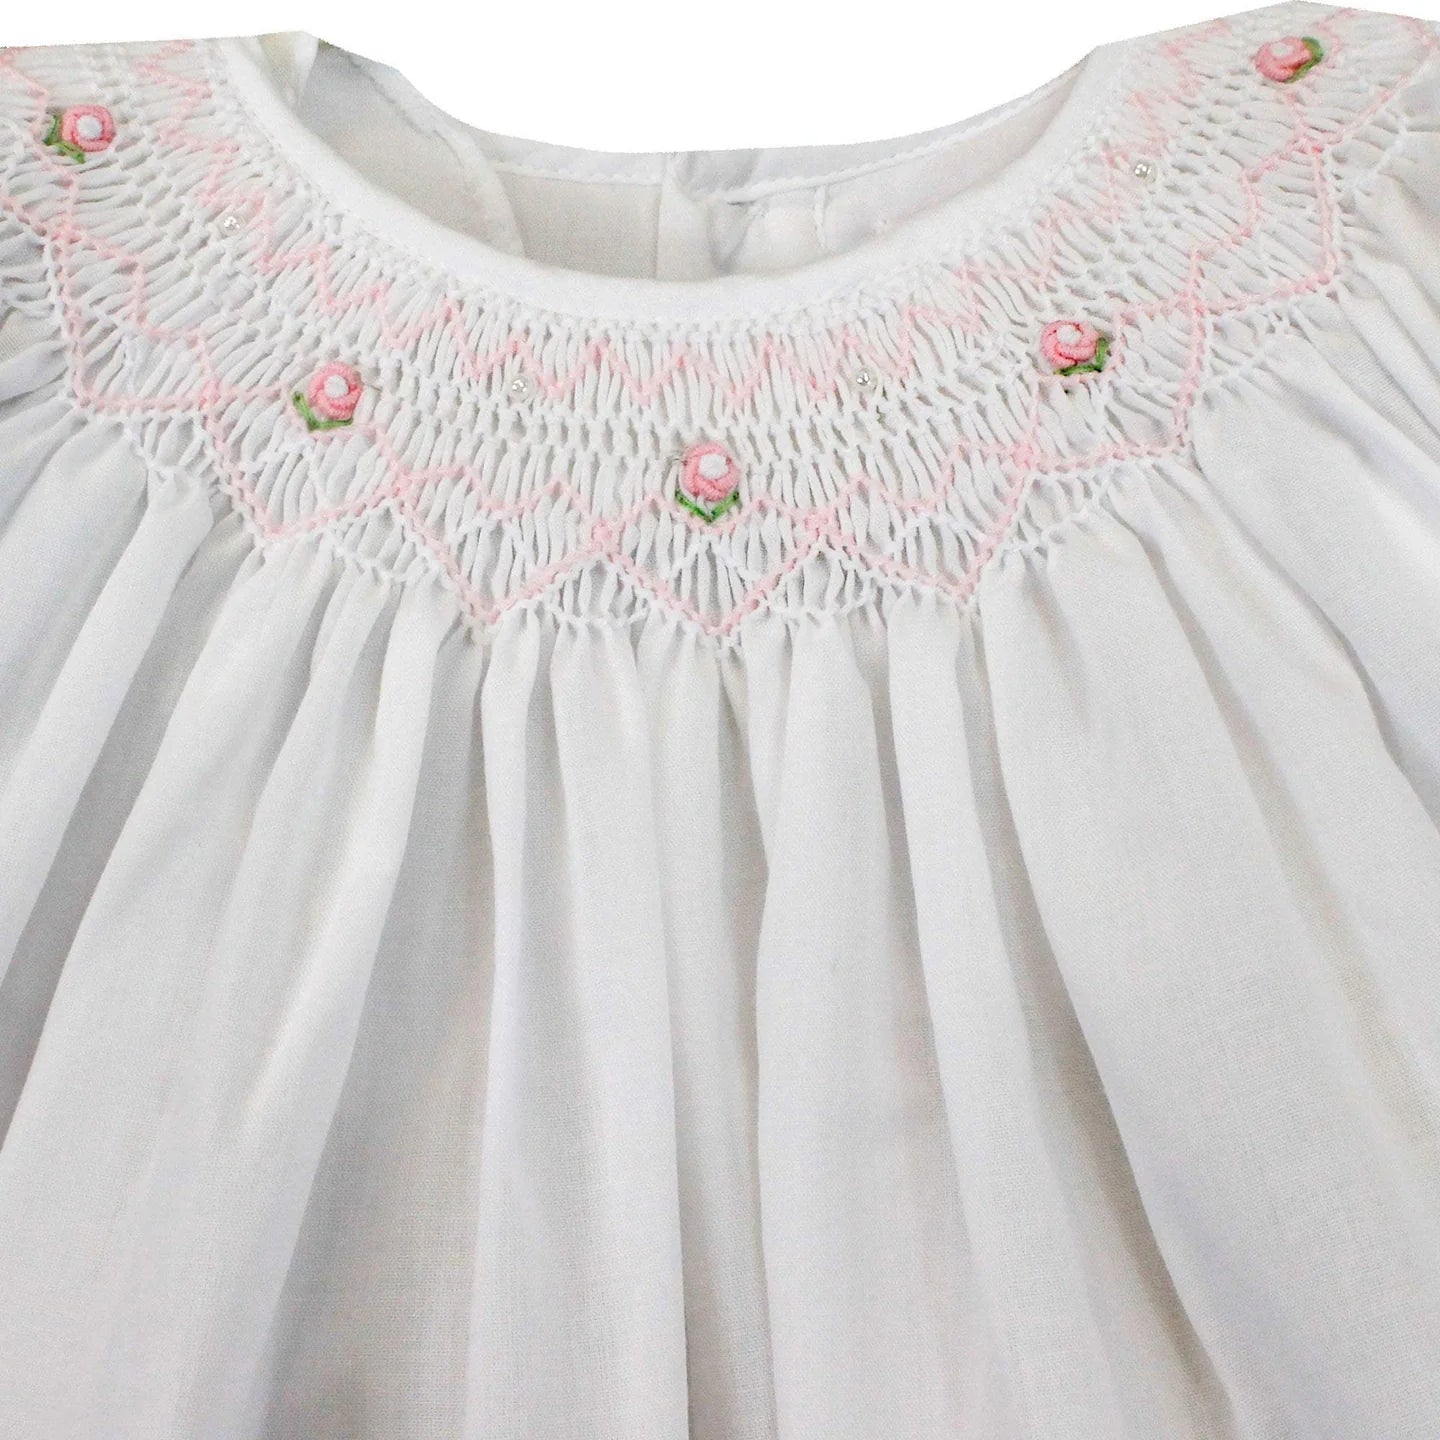 Petit Ami- Daygown with Heart Smocking & Pearls